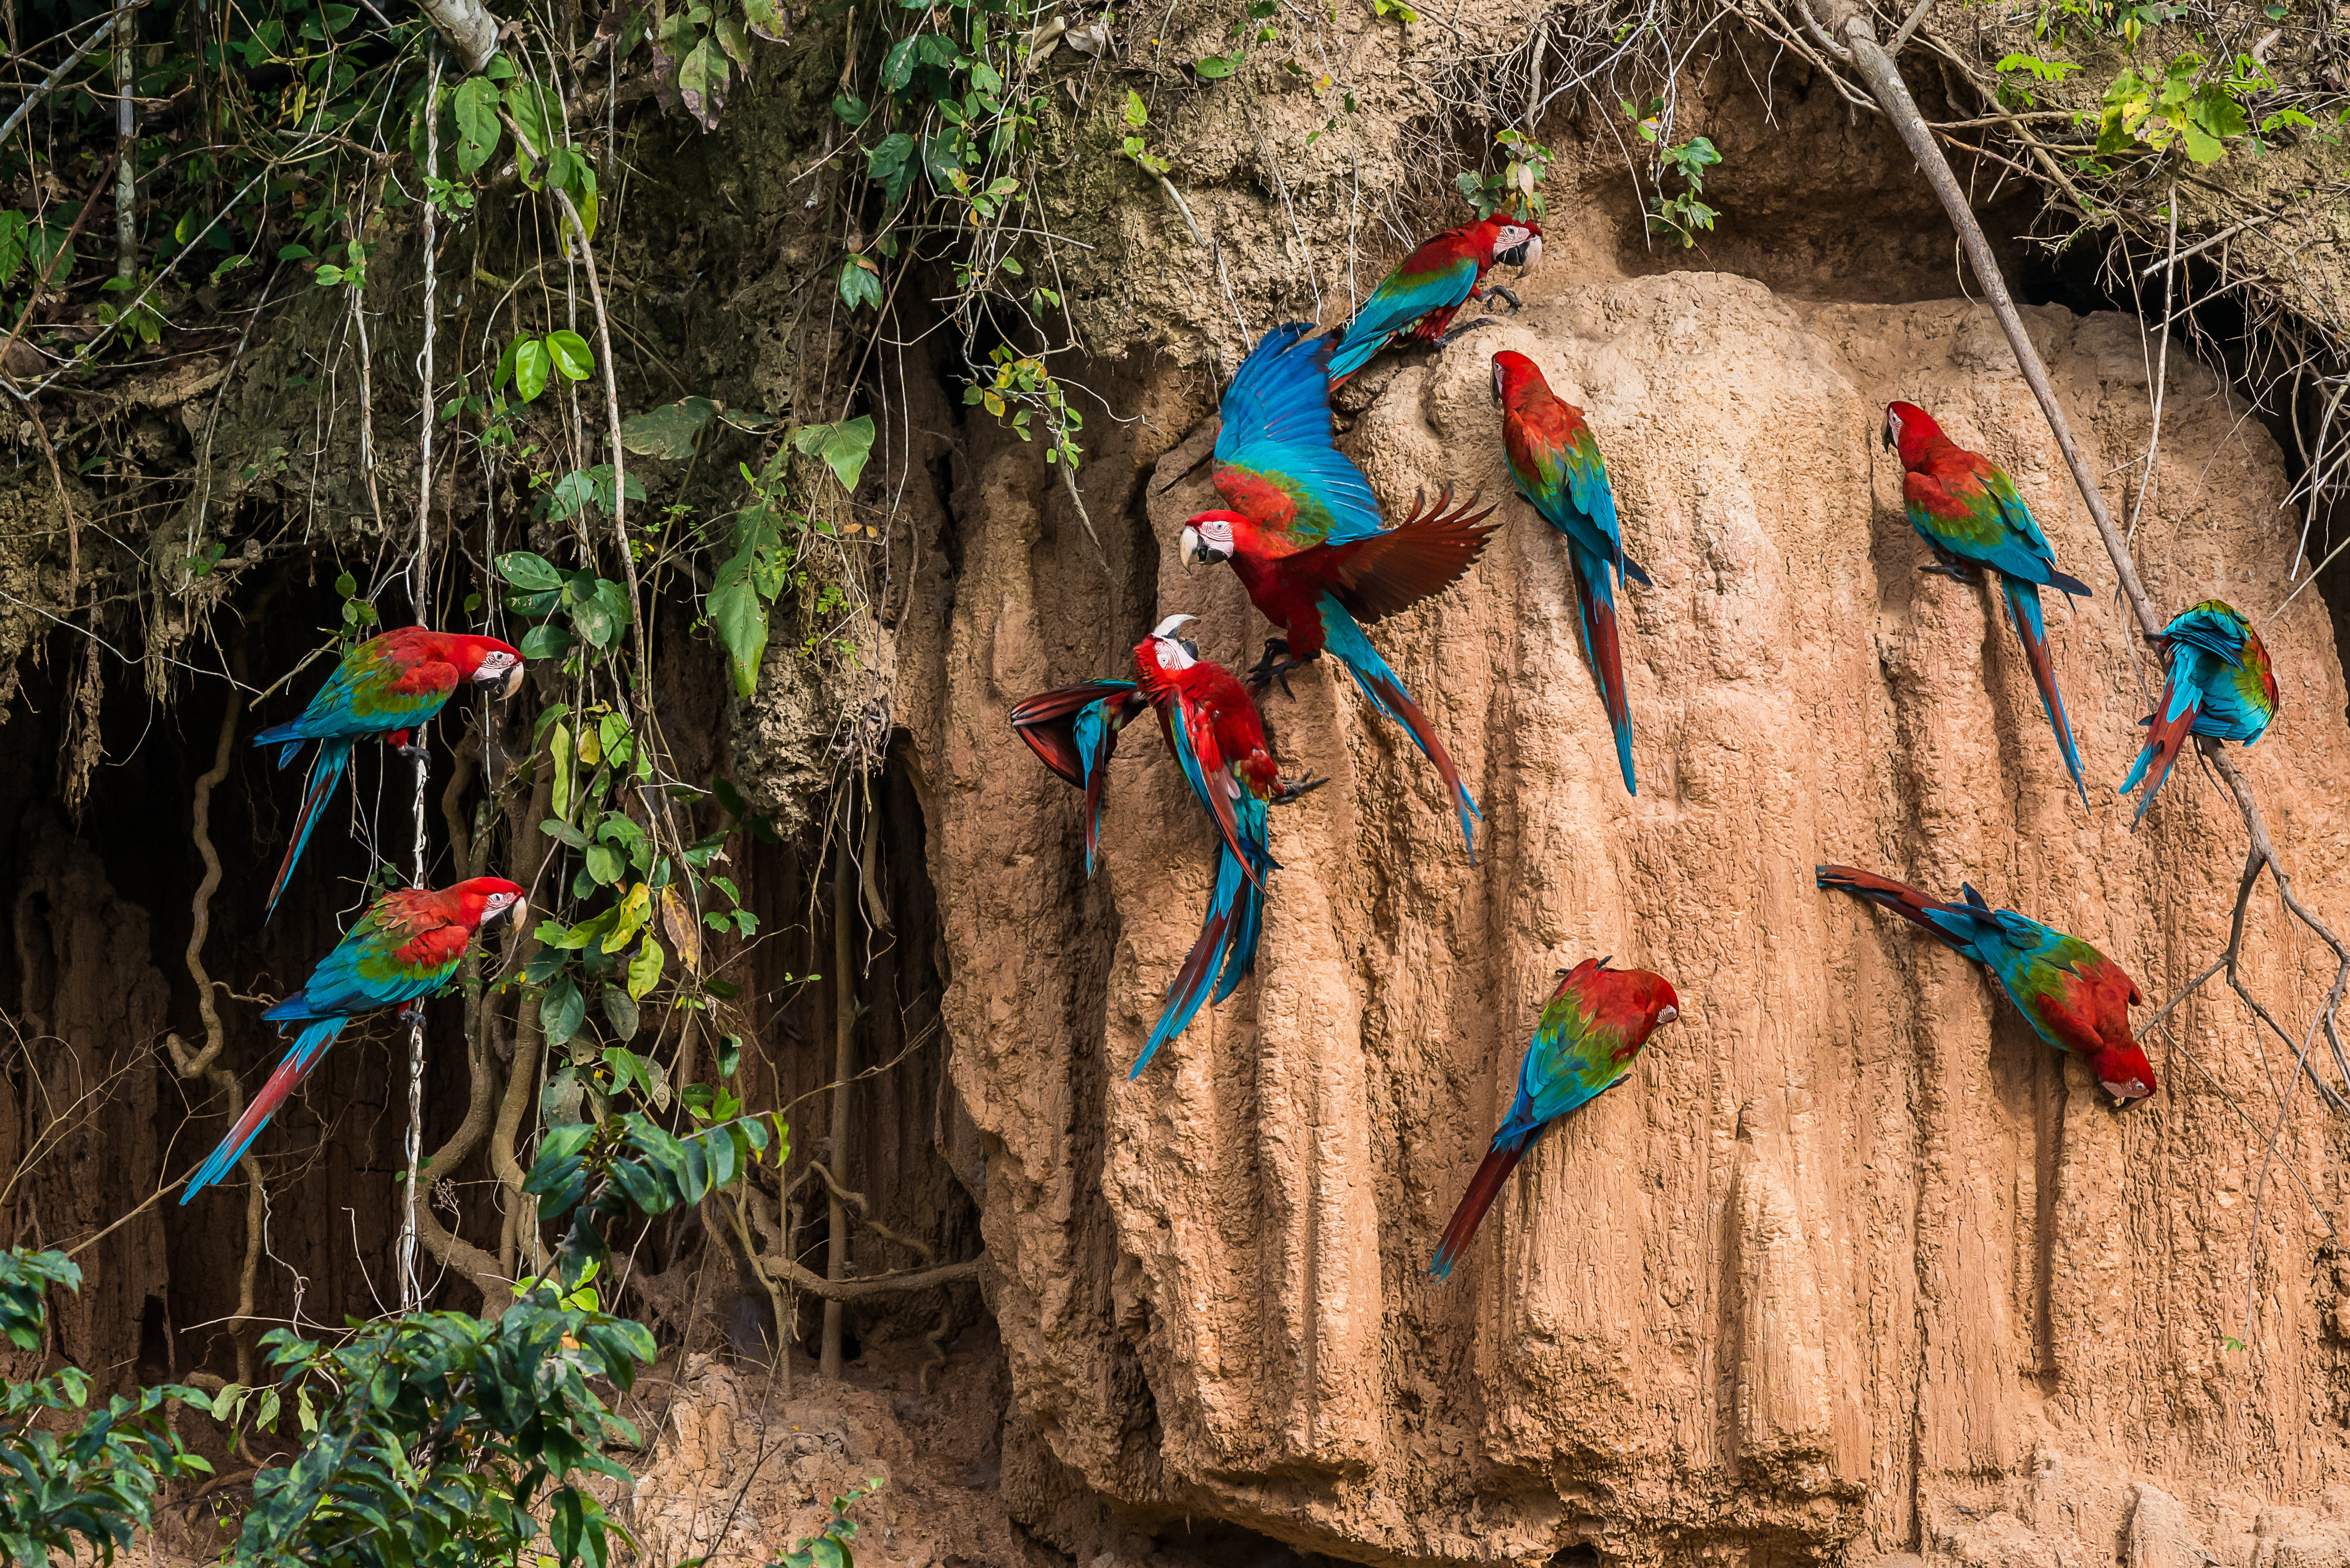 Macaws in the Amazon jungle